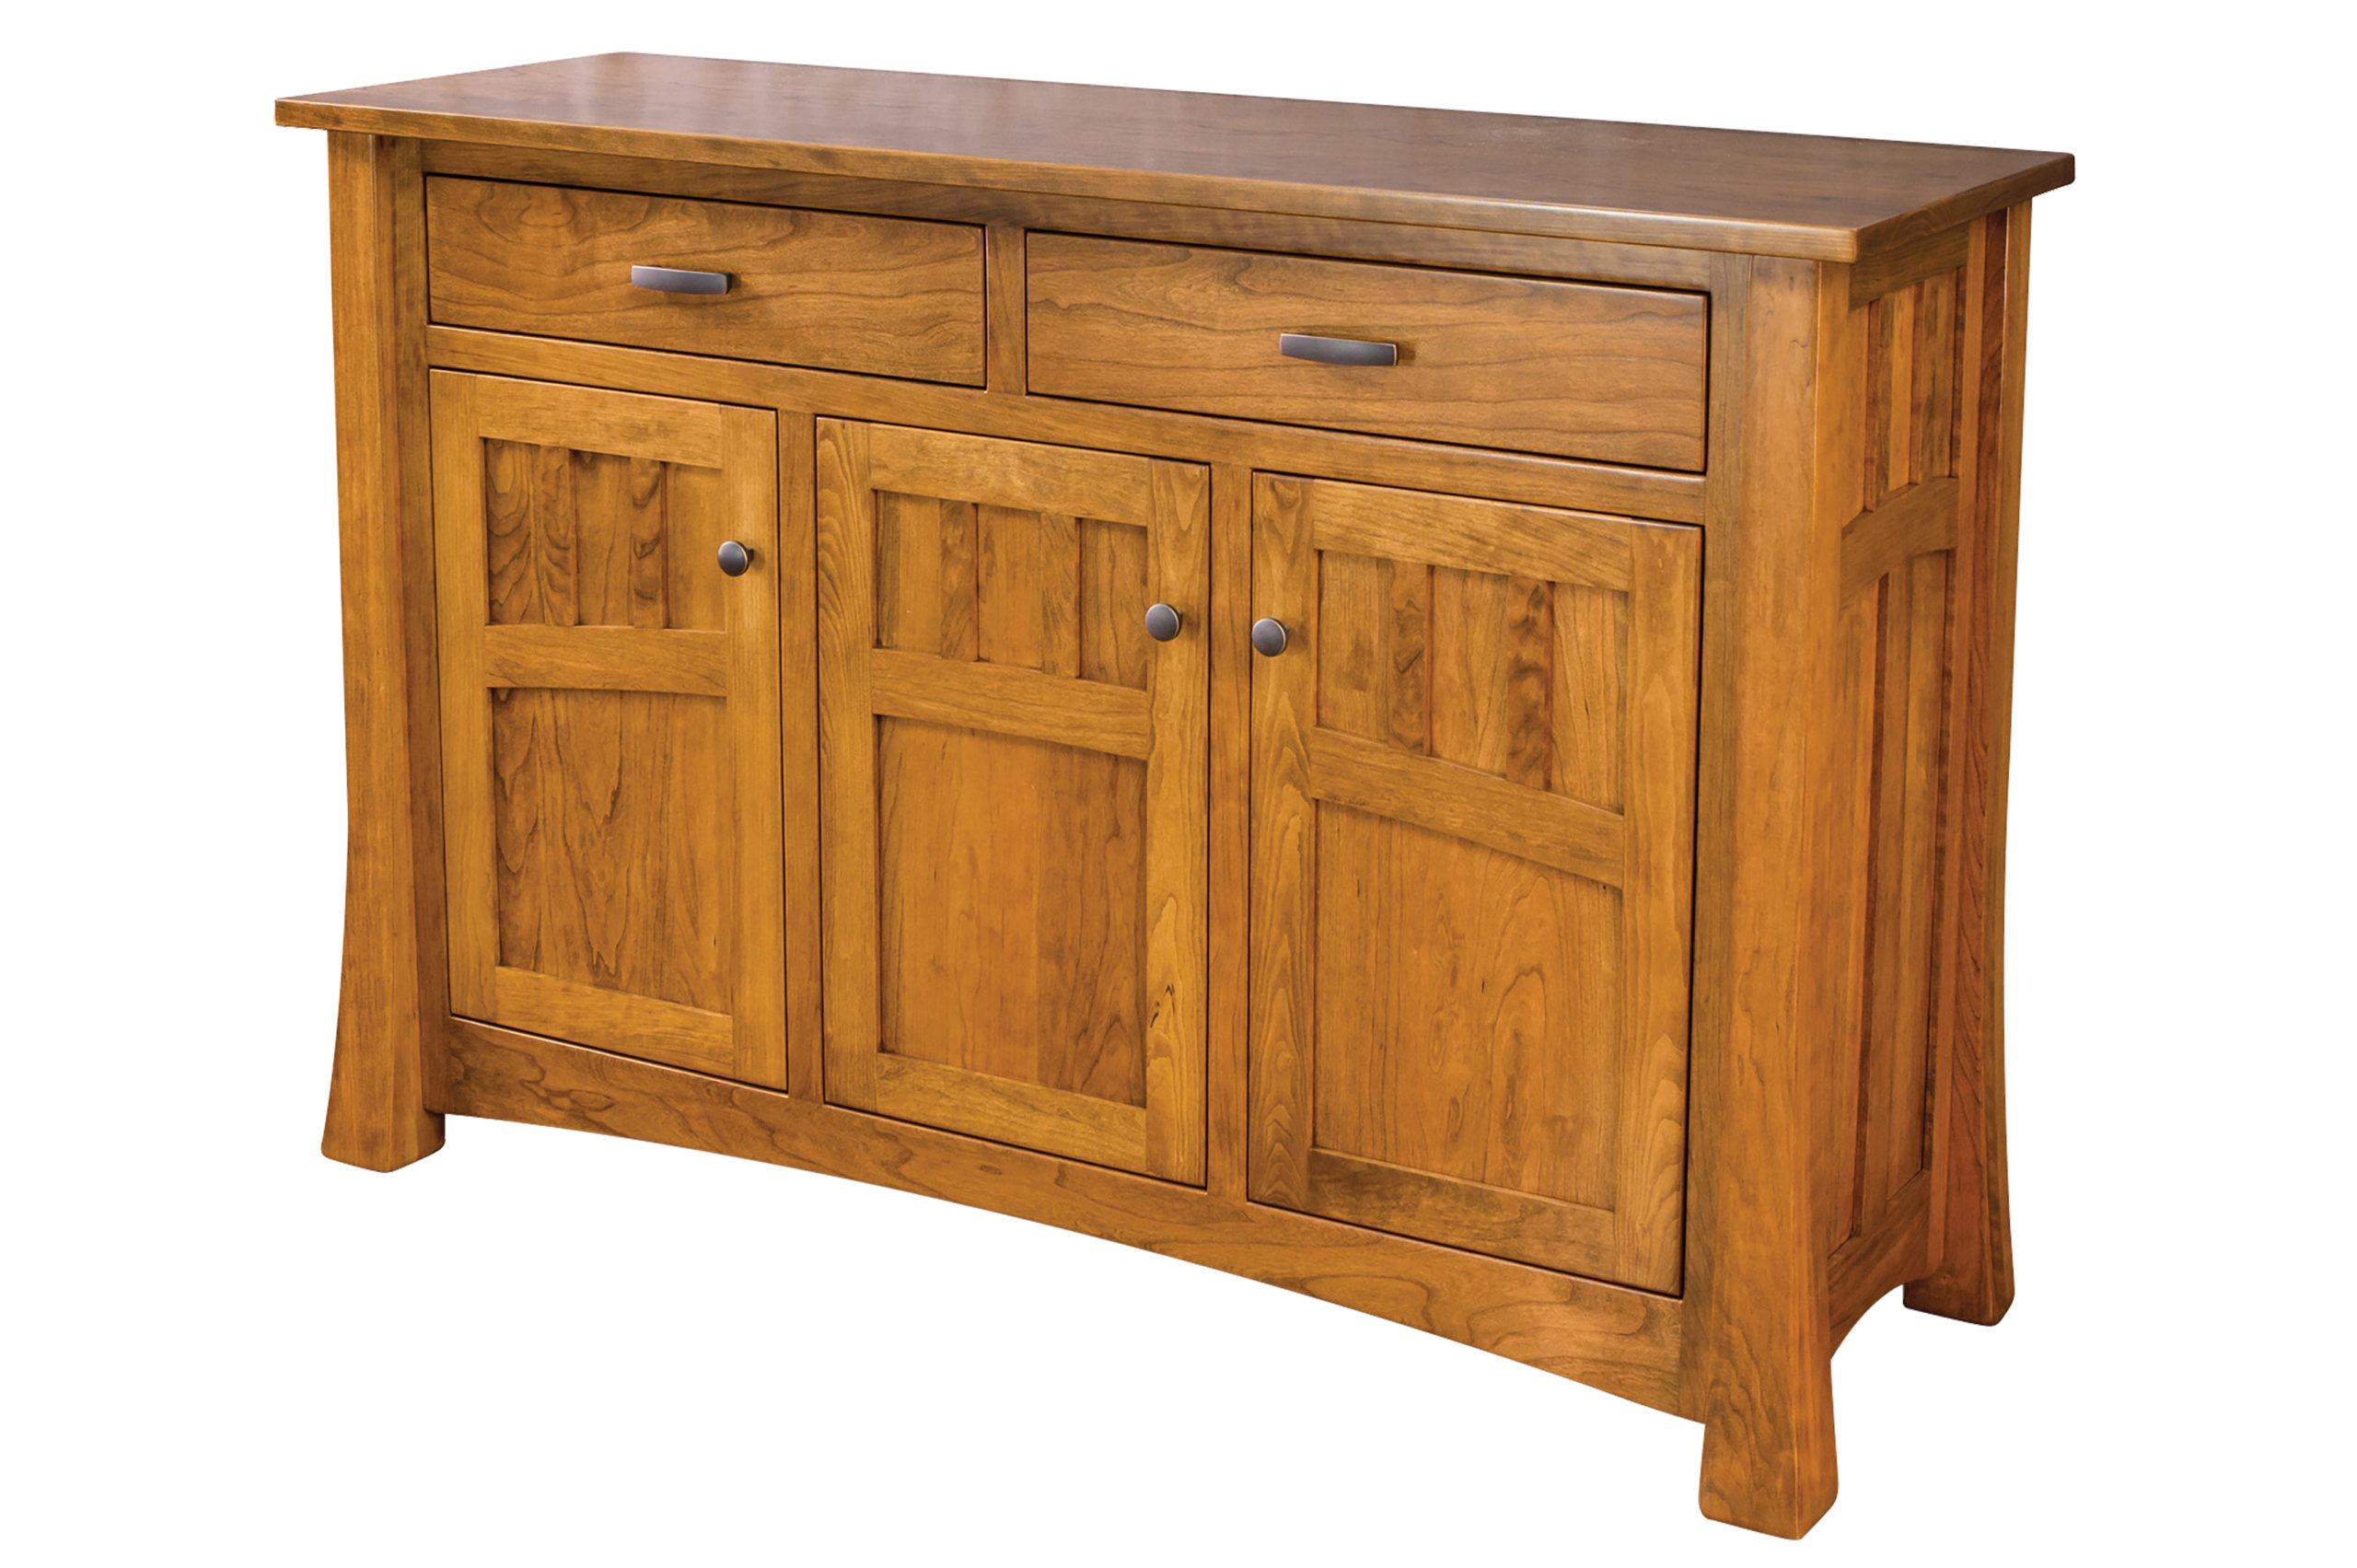 Dining Room Buffet Tables For Sale